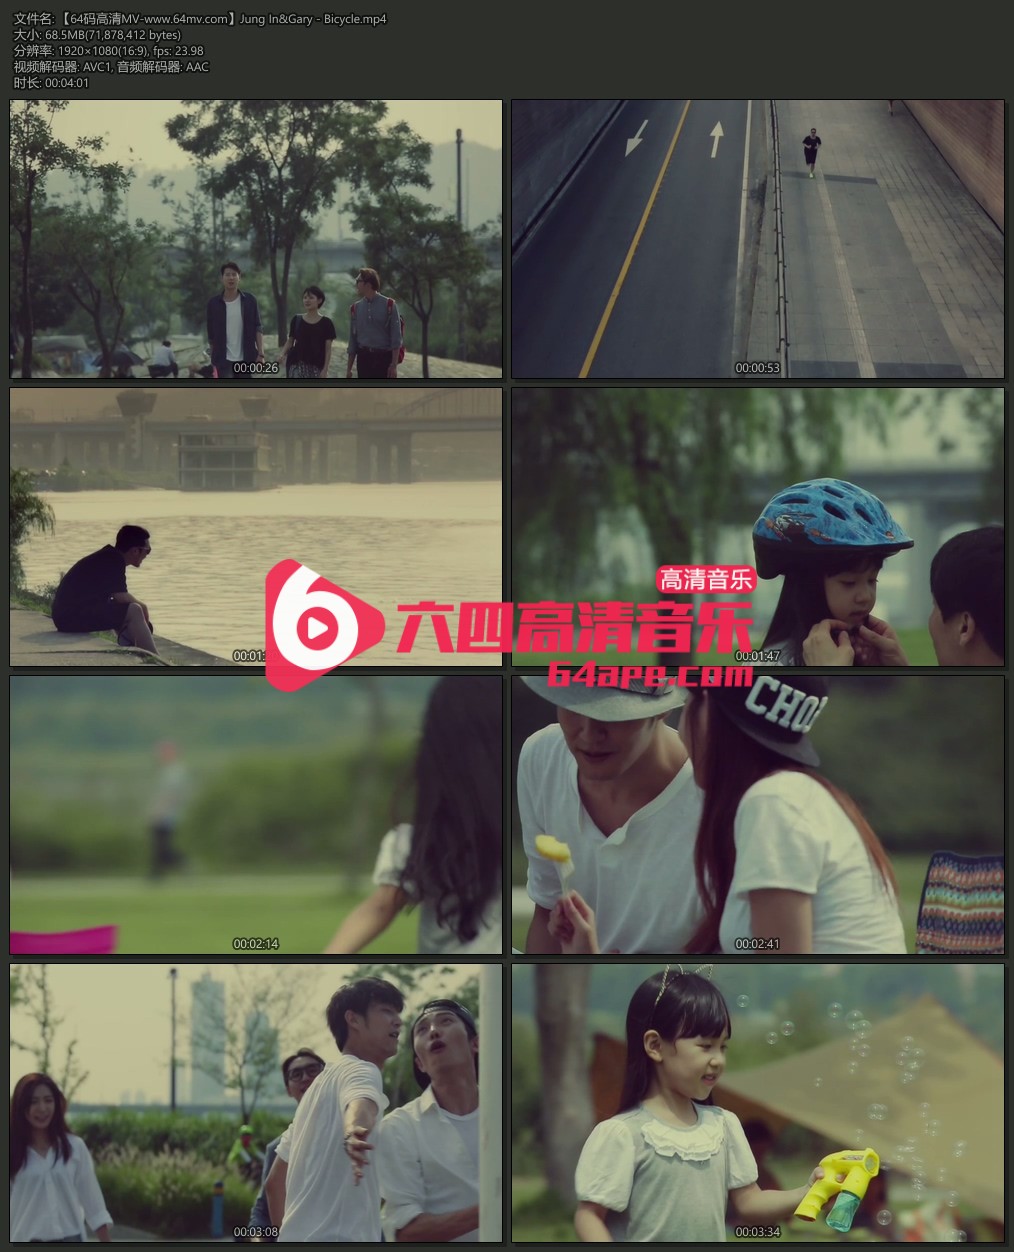 Jung In&Gary 《Bicycle》 1080P